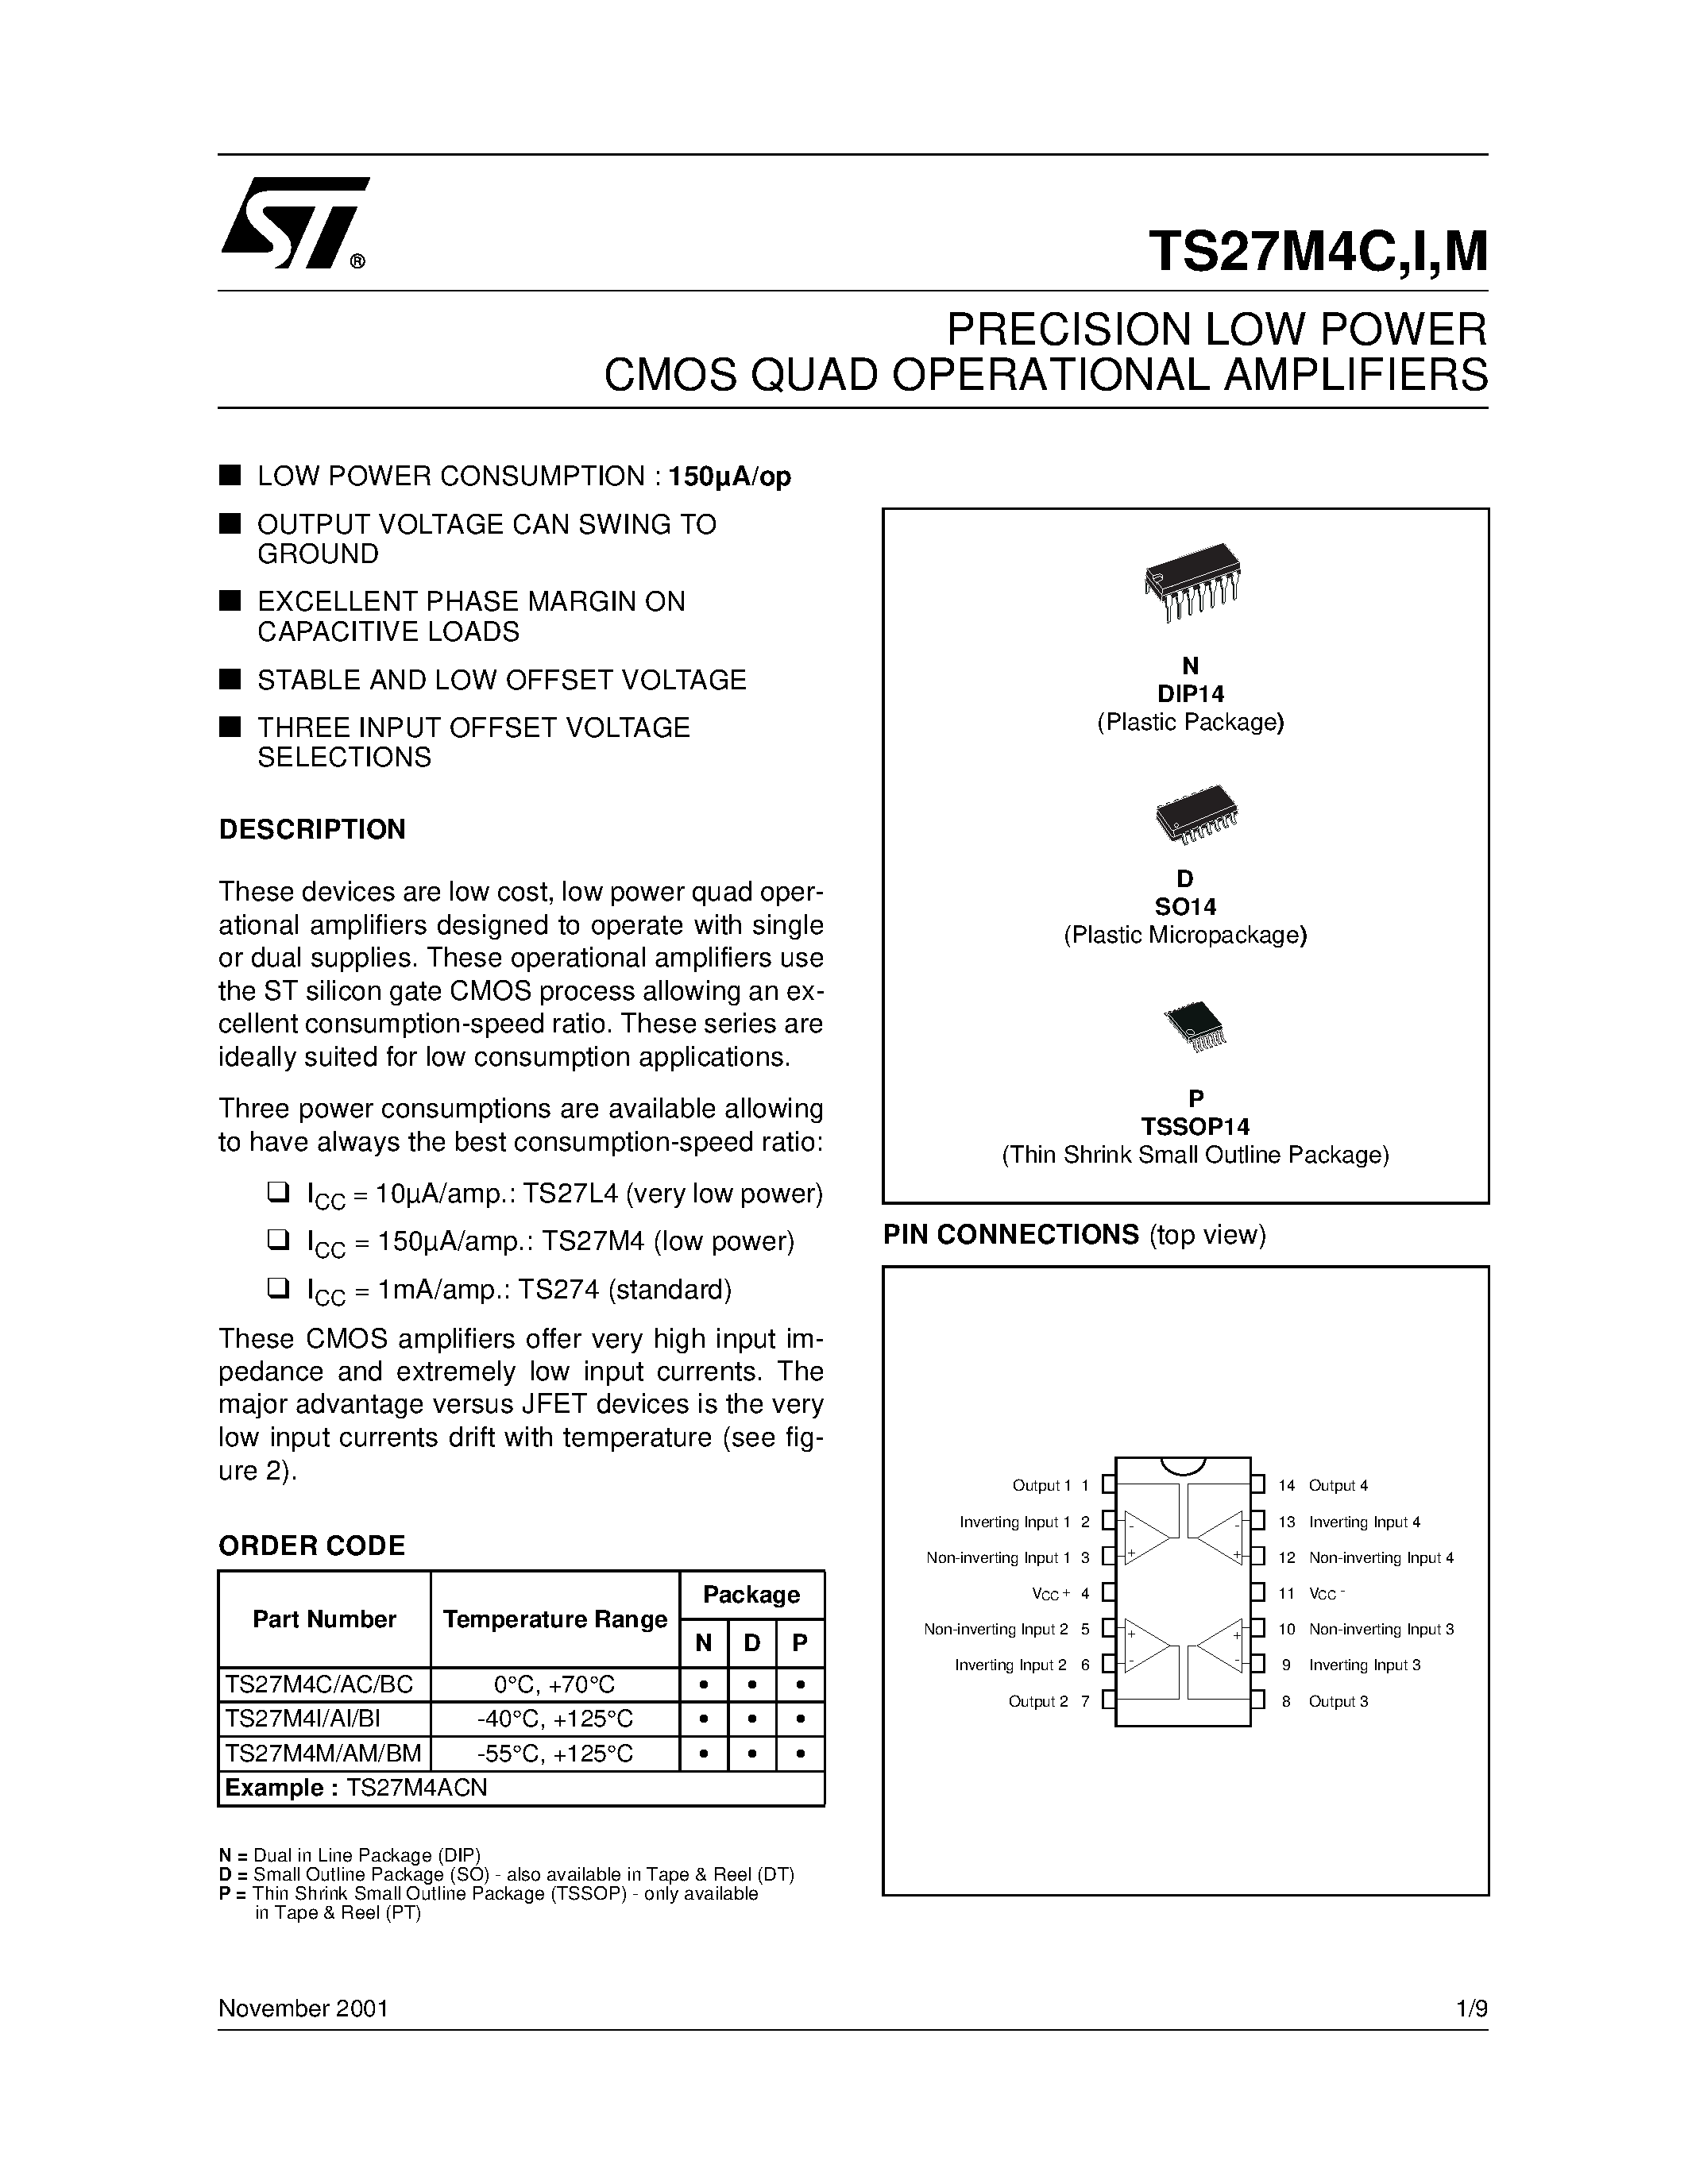 Datasheet TS27M4AM - PRECISION LOW POWER CMOS QUAD OPERATIONAL AMPLIFIERS page 1